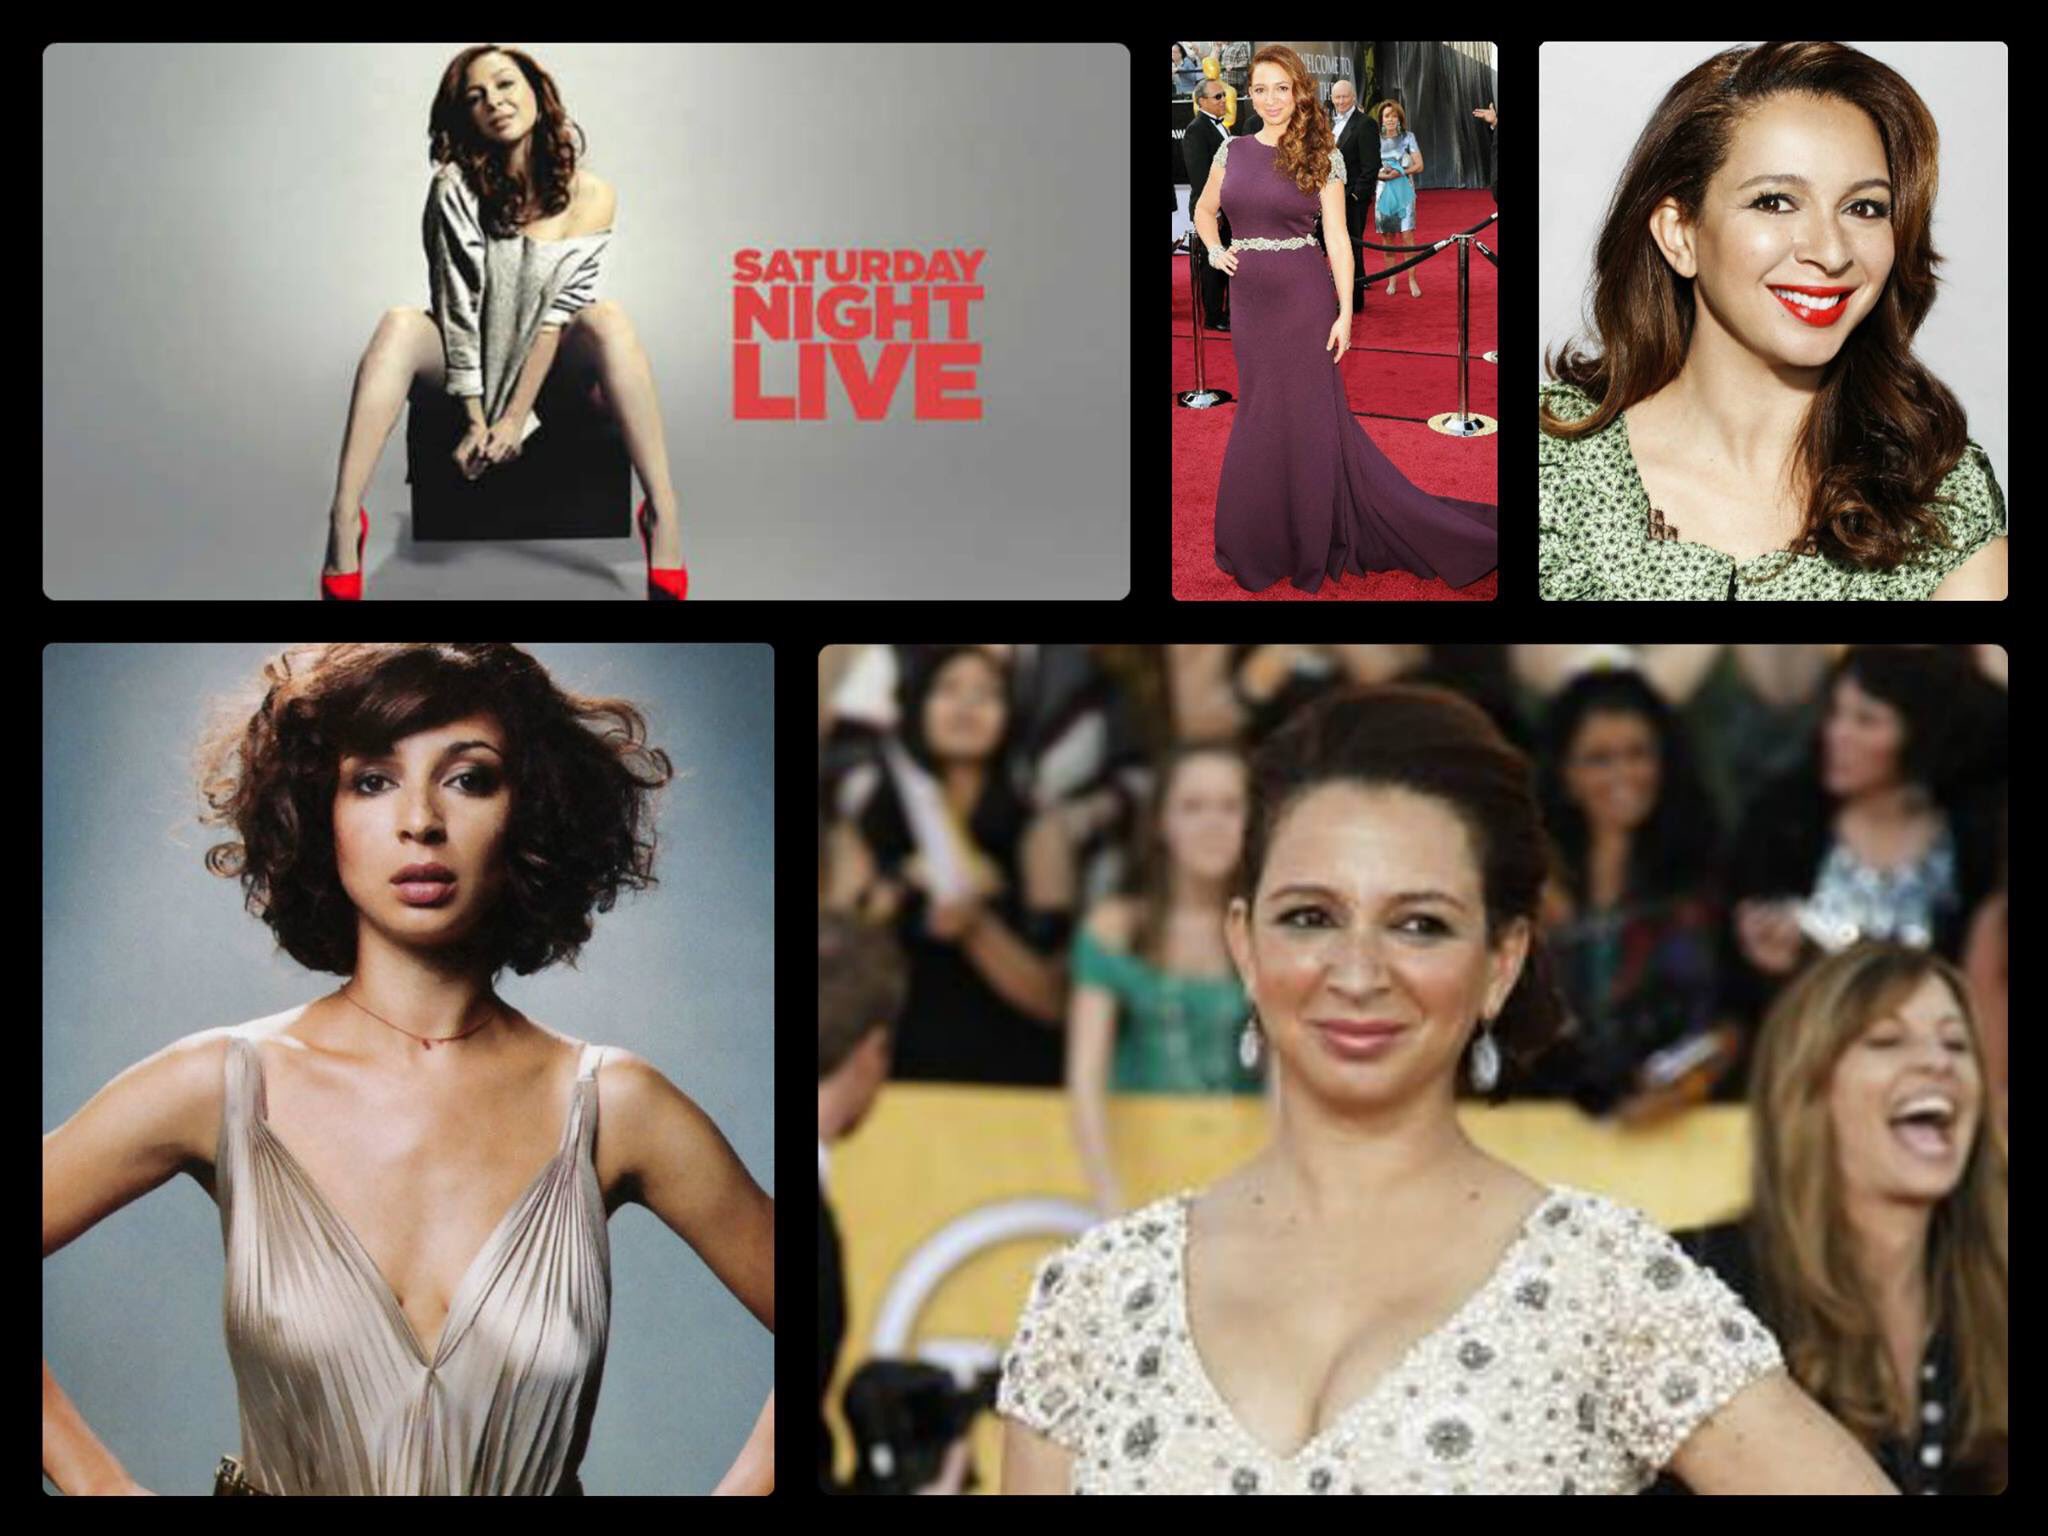 Today in History
July 27th
Happy Birthday 47th to my favorite comedian and actress
1972 - Maya Rudolph 